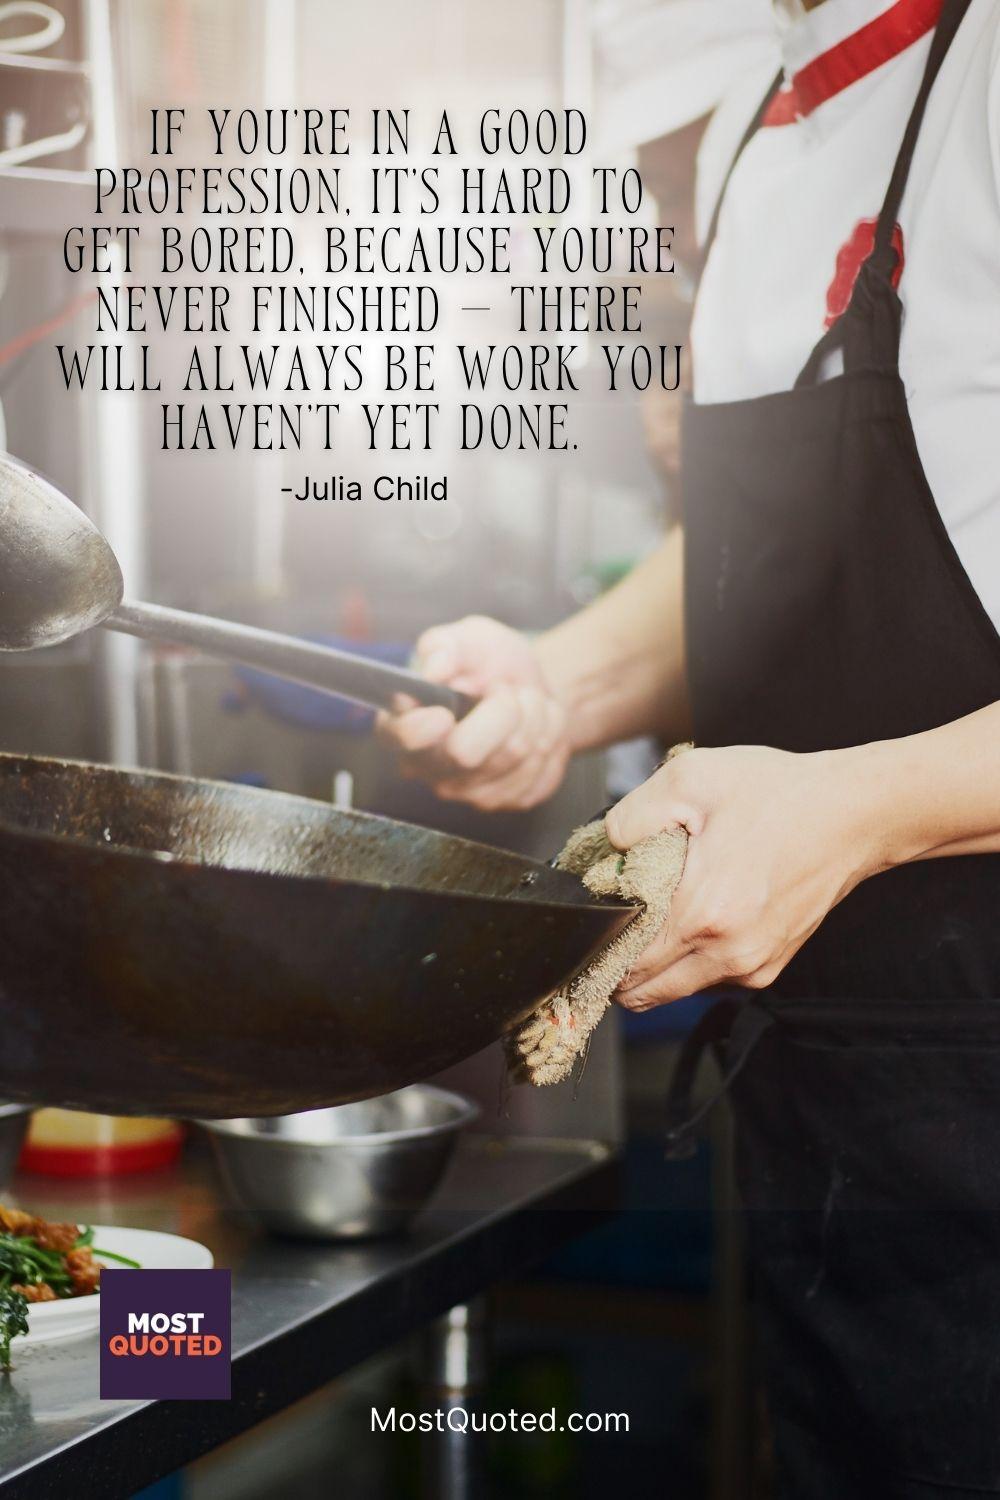 If you’re in a good profession, it’s hard to get bored, because you’re never finished — there will always be work you haven’t yet done. - Julia Child